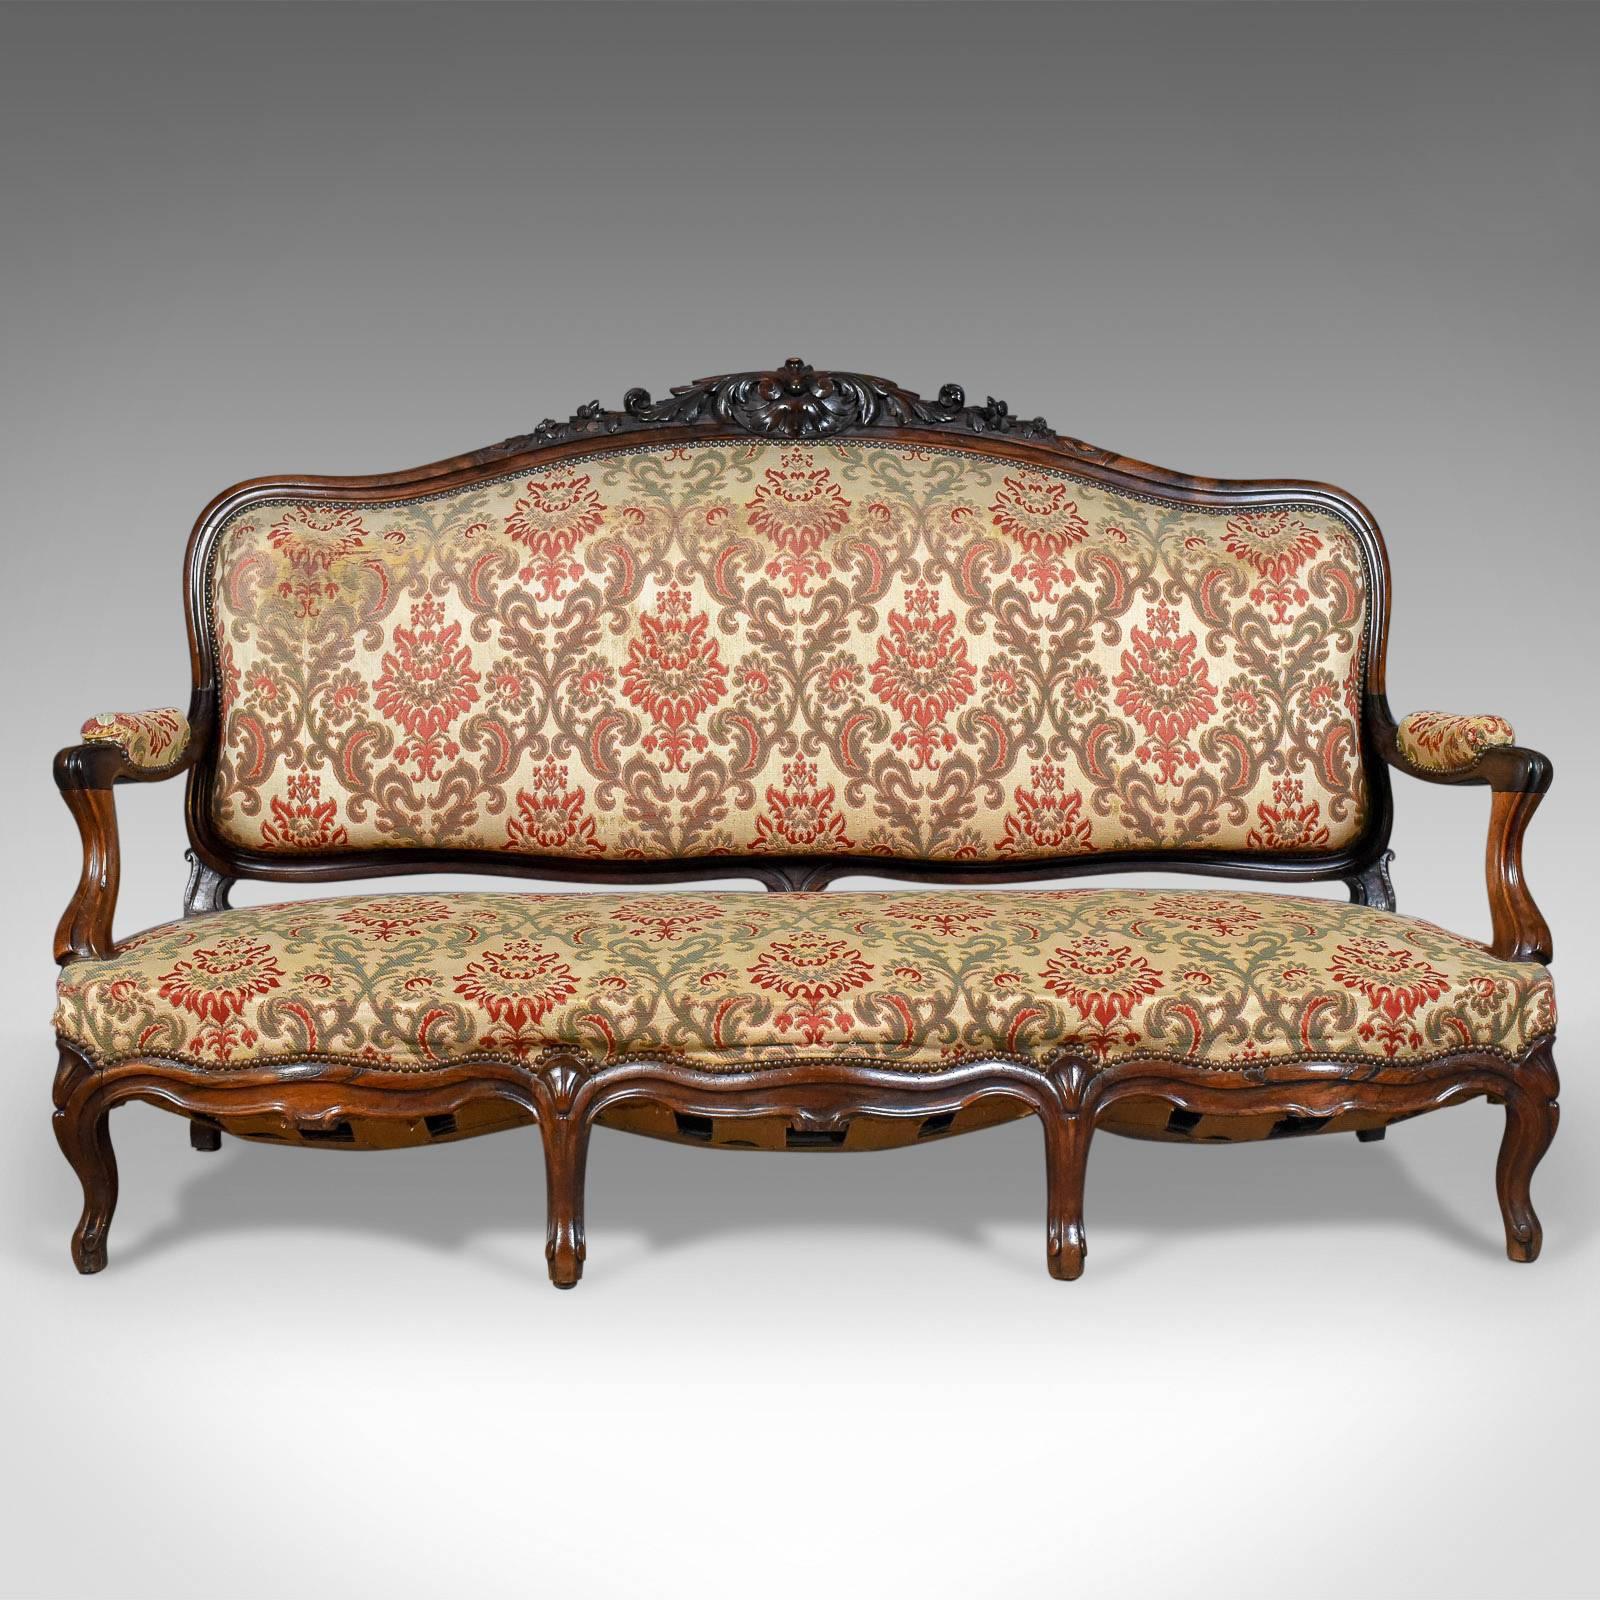 This is a Victorian antique settee on a rosewood frame, an English 19th century sofa dating to circa 1850.

A sumptuous piece of Victorian elegance
Dark rosewood frame with good color and desirable aged patina
Broad, comfortable seat with